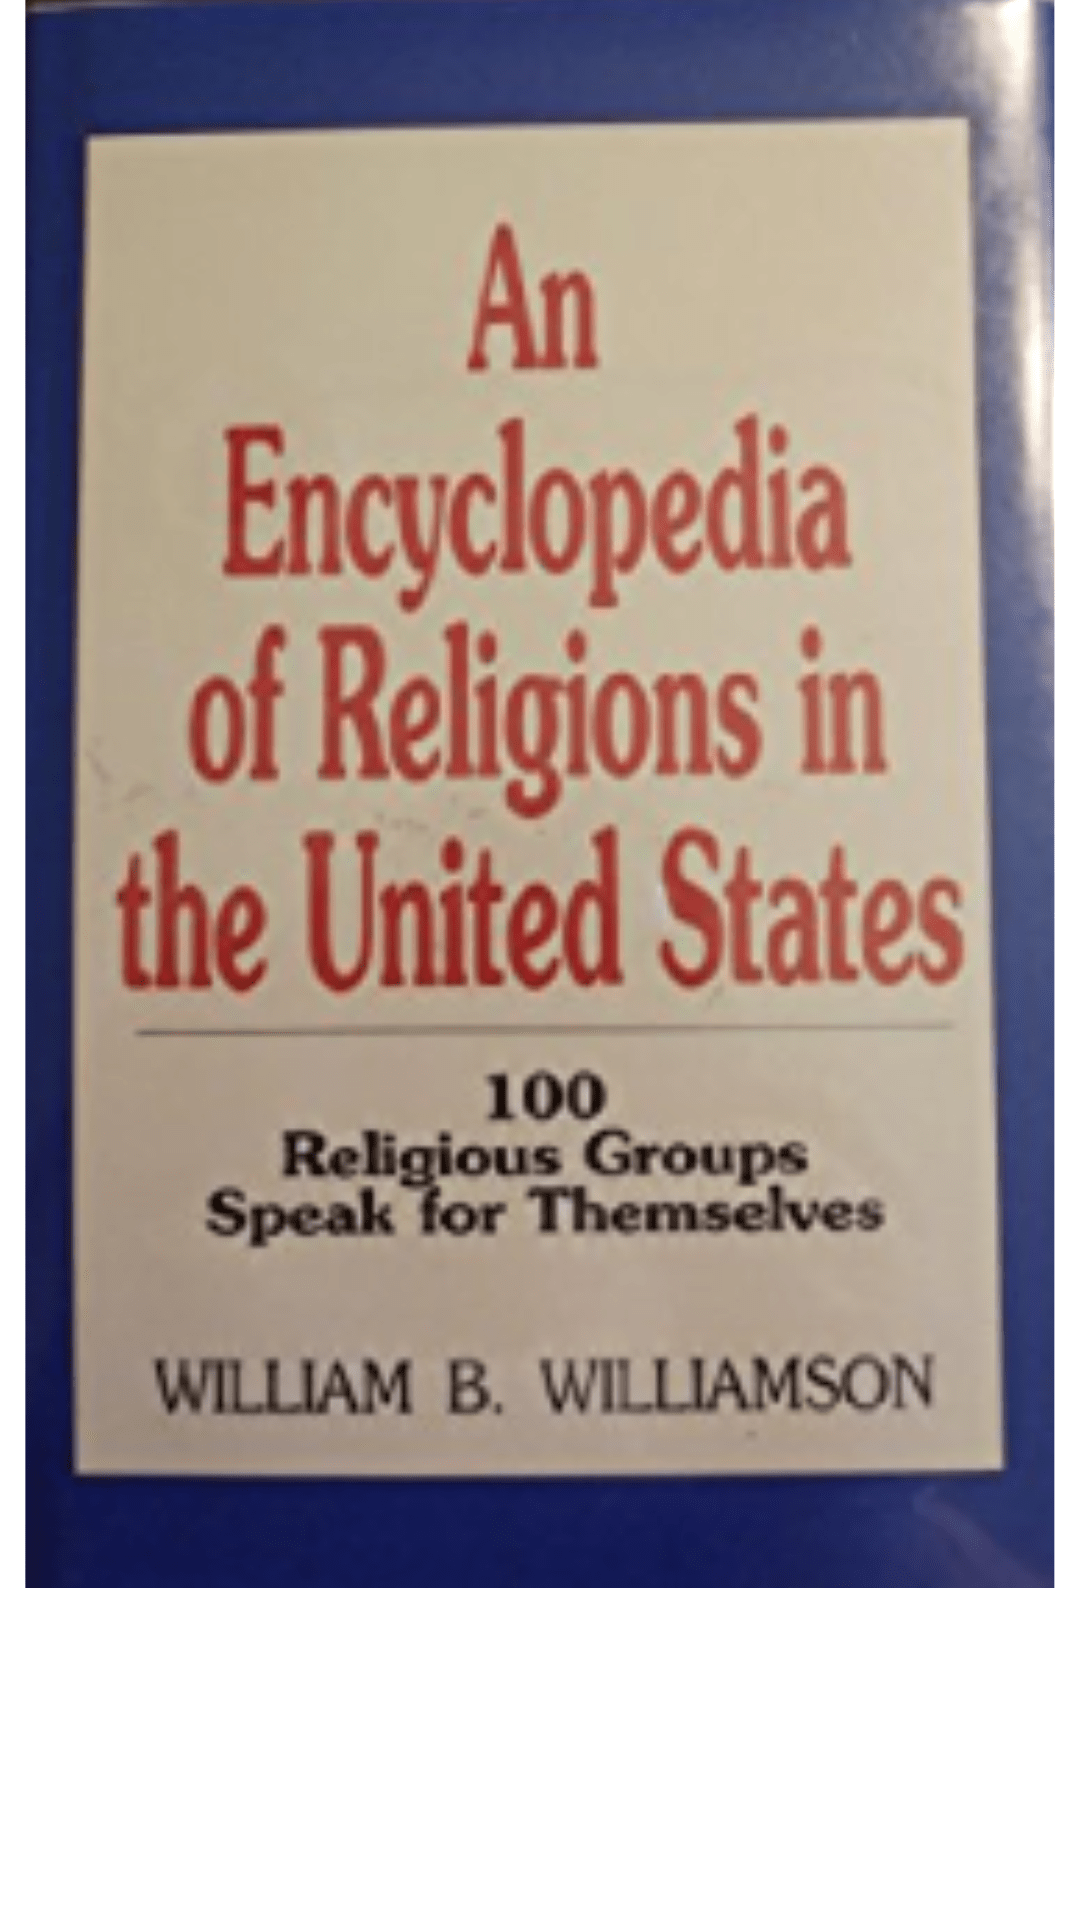 An Encyclopedia of Religions in the United States : One Hundred Religious Groups Speak for Themselves